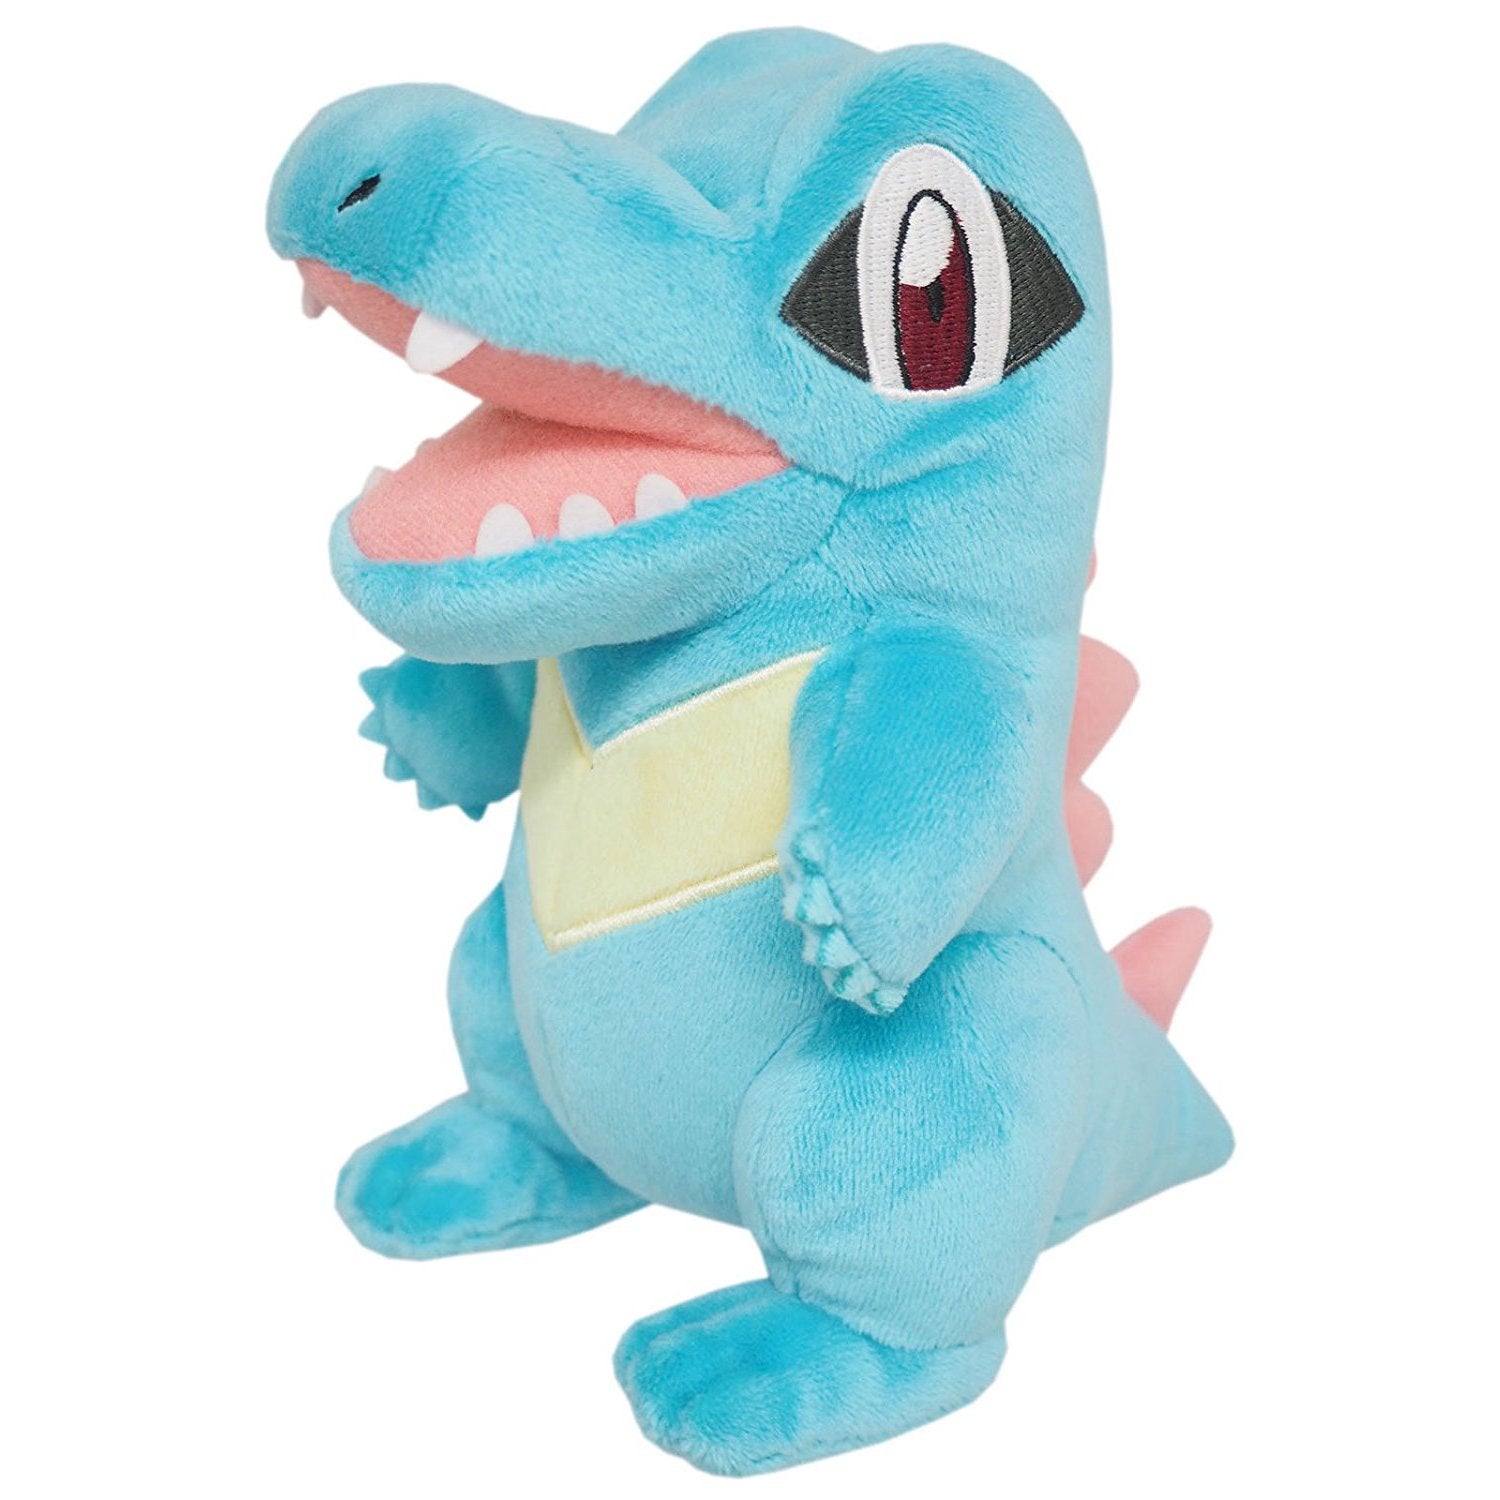 Totodile - Pokemon All Star Collection Plush Toy